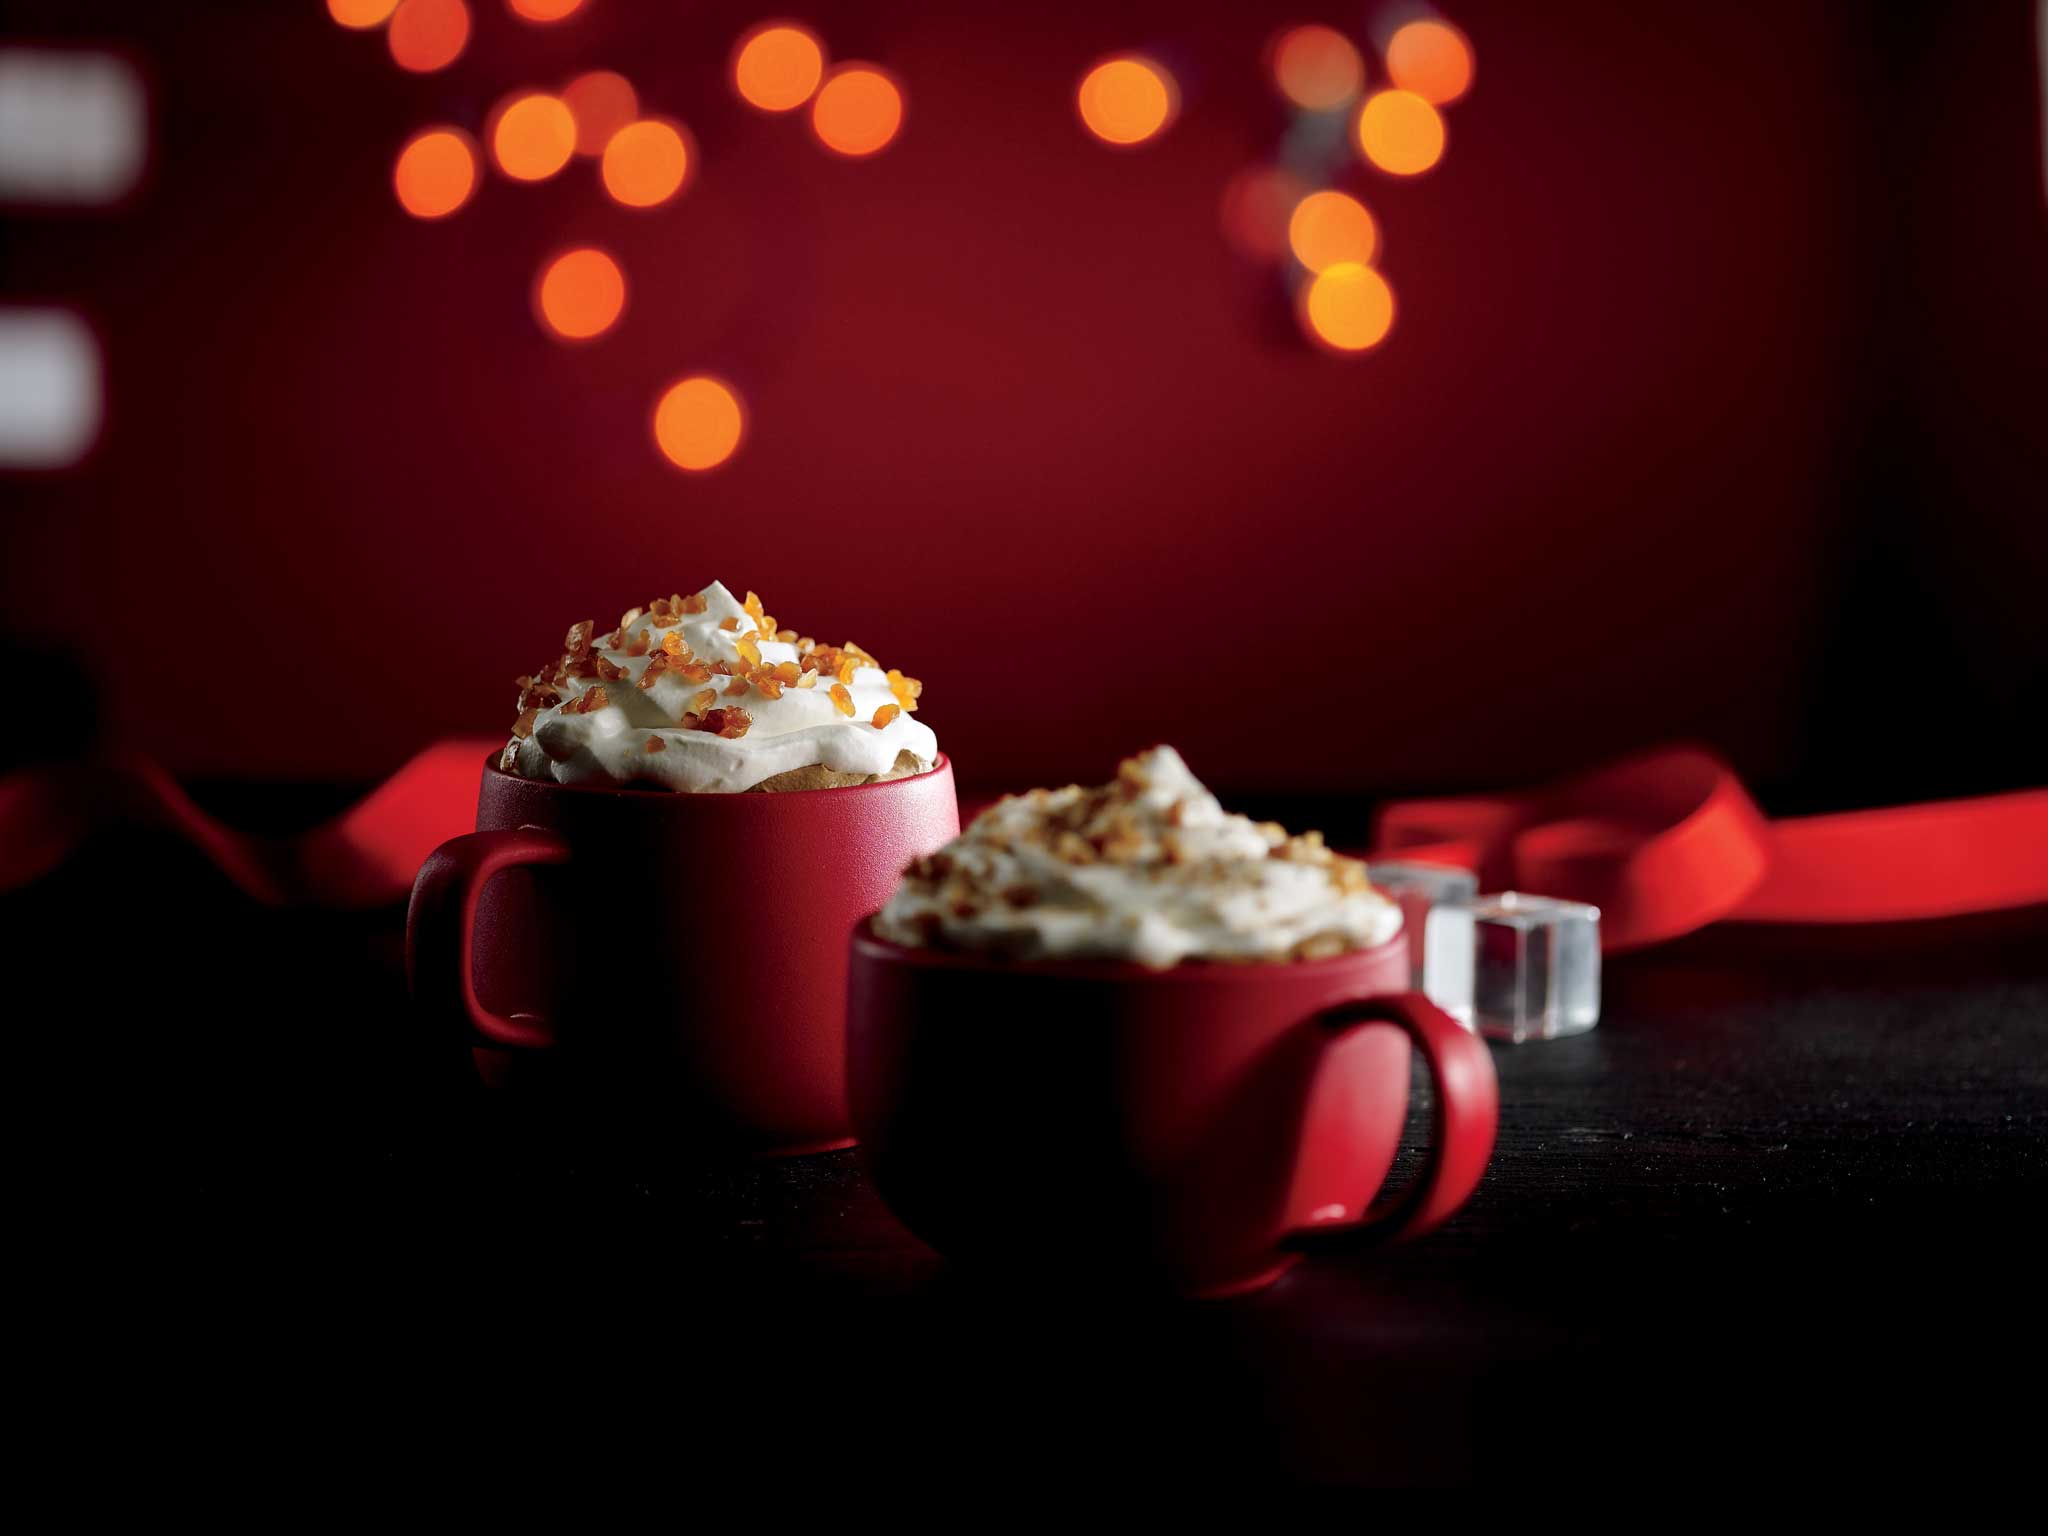 Add Joy to your Toffee Nut Latte